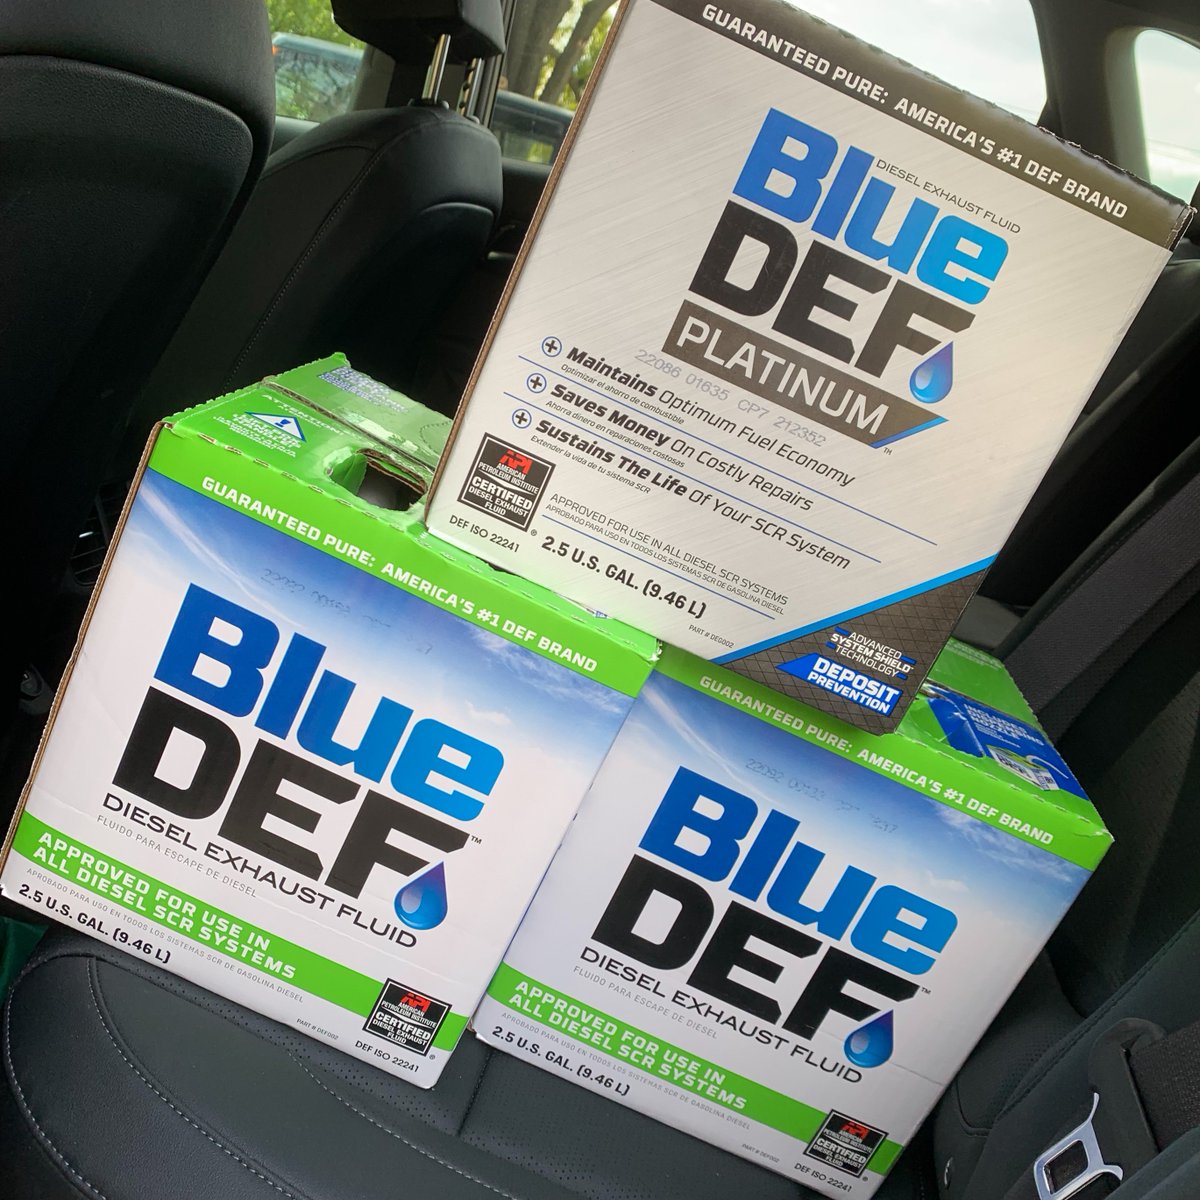 Make sure you're stocked up before you hit the road! #BlueDEF